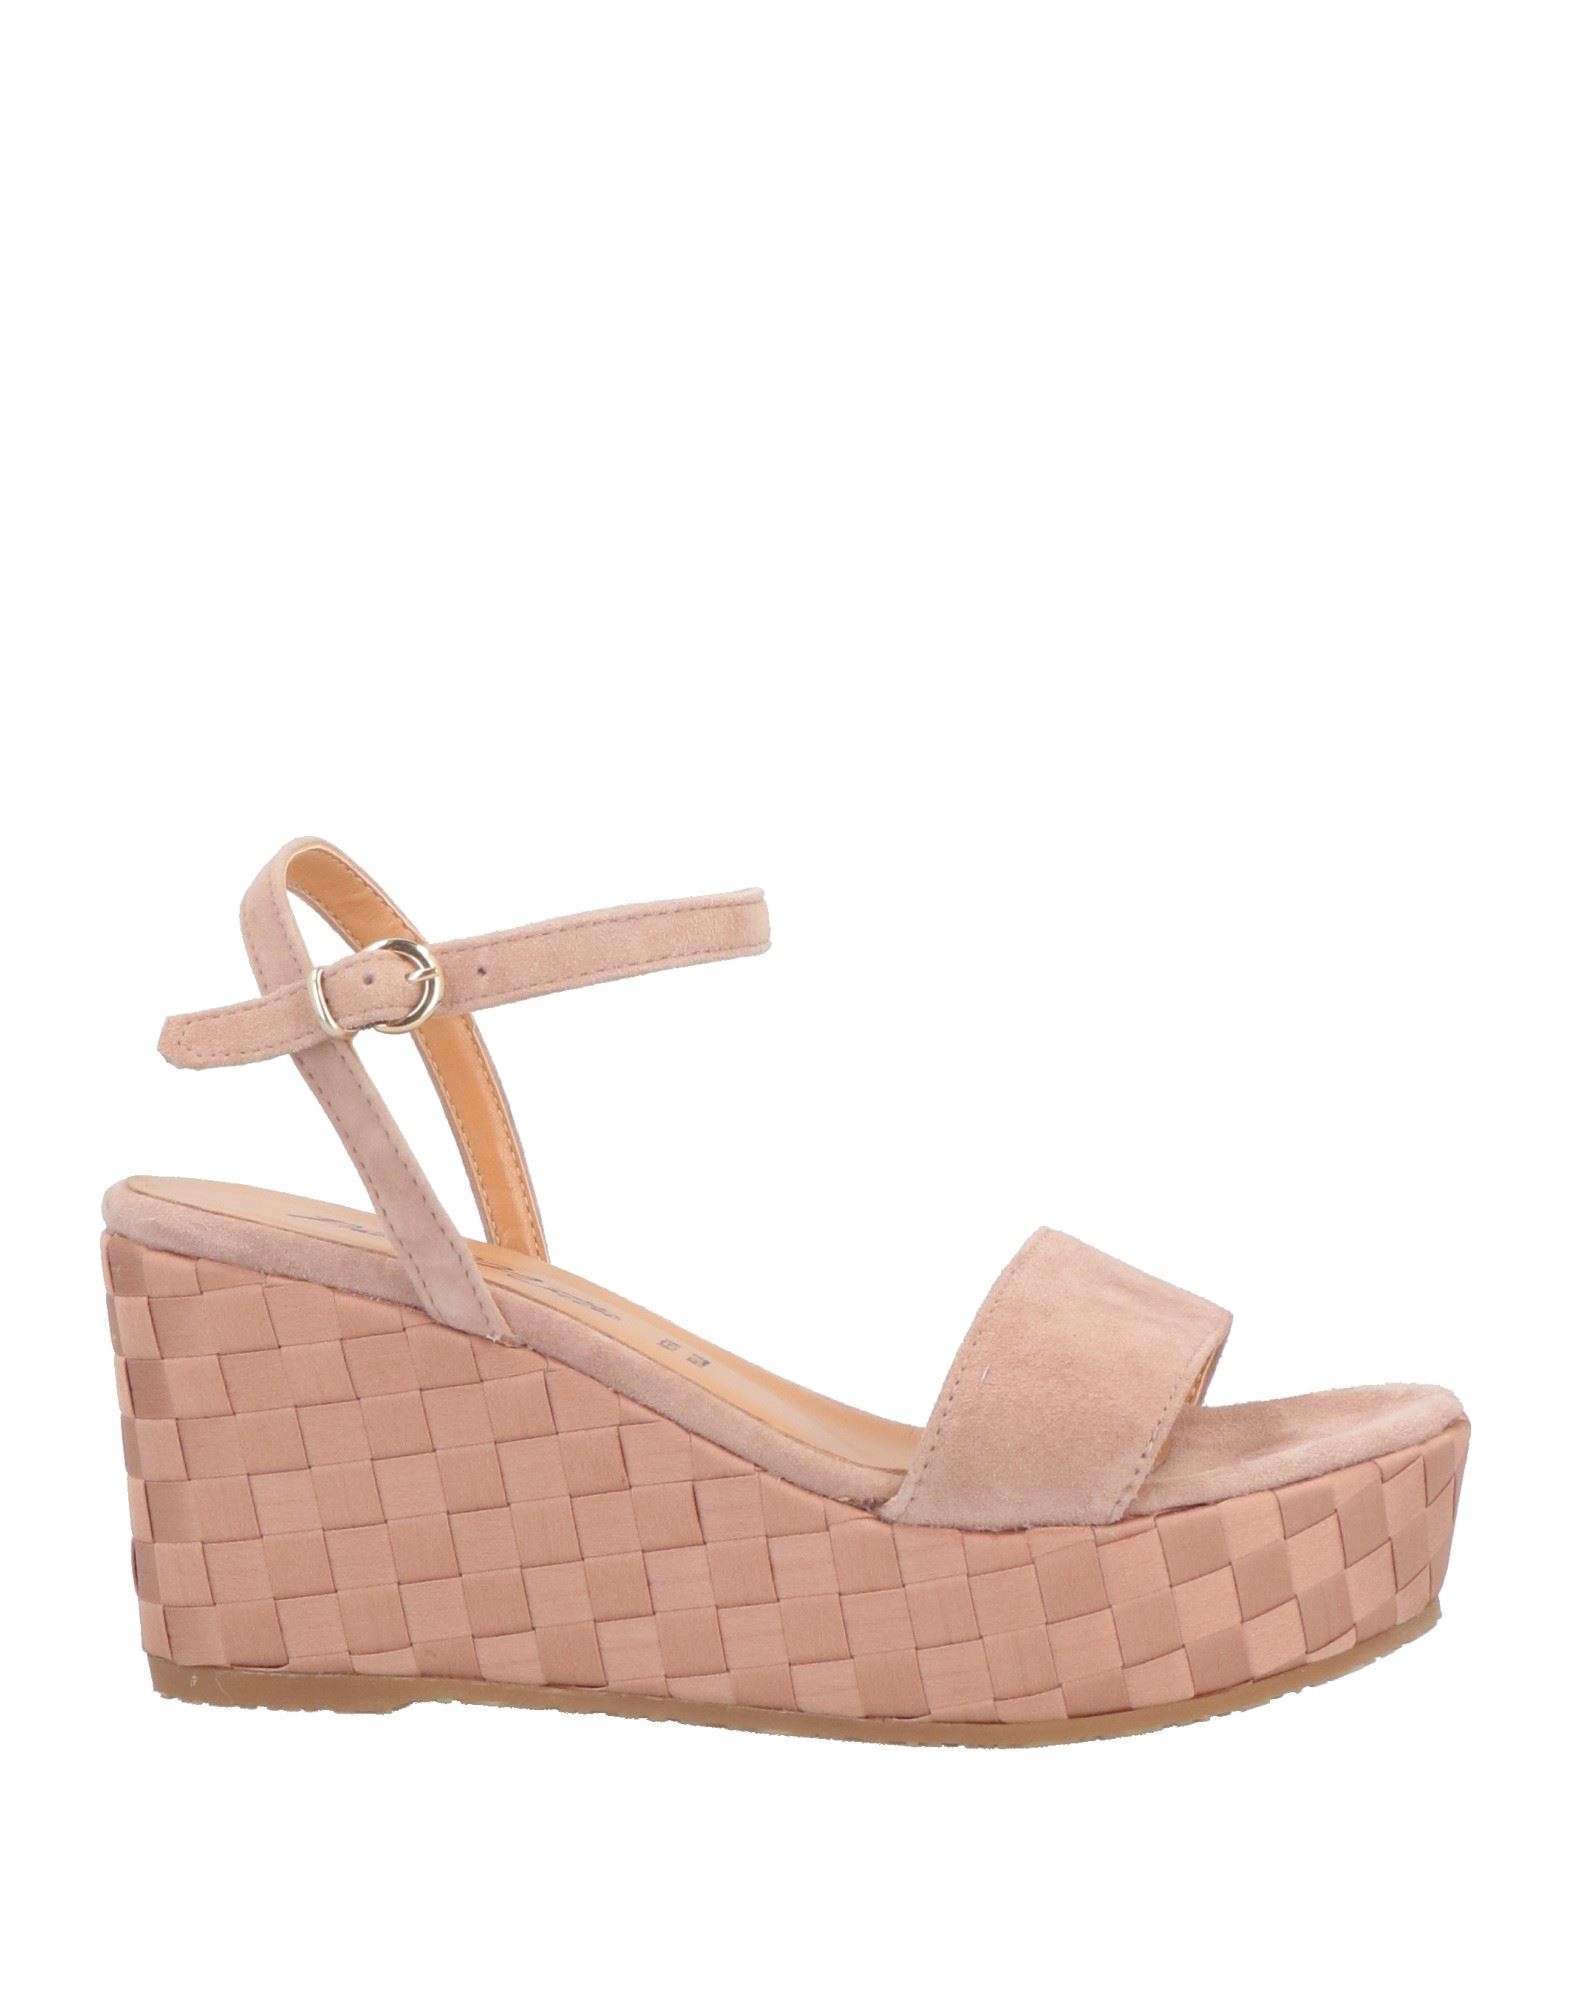 Paolo Mattei Sandals In Pastel Pink